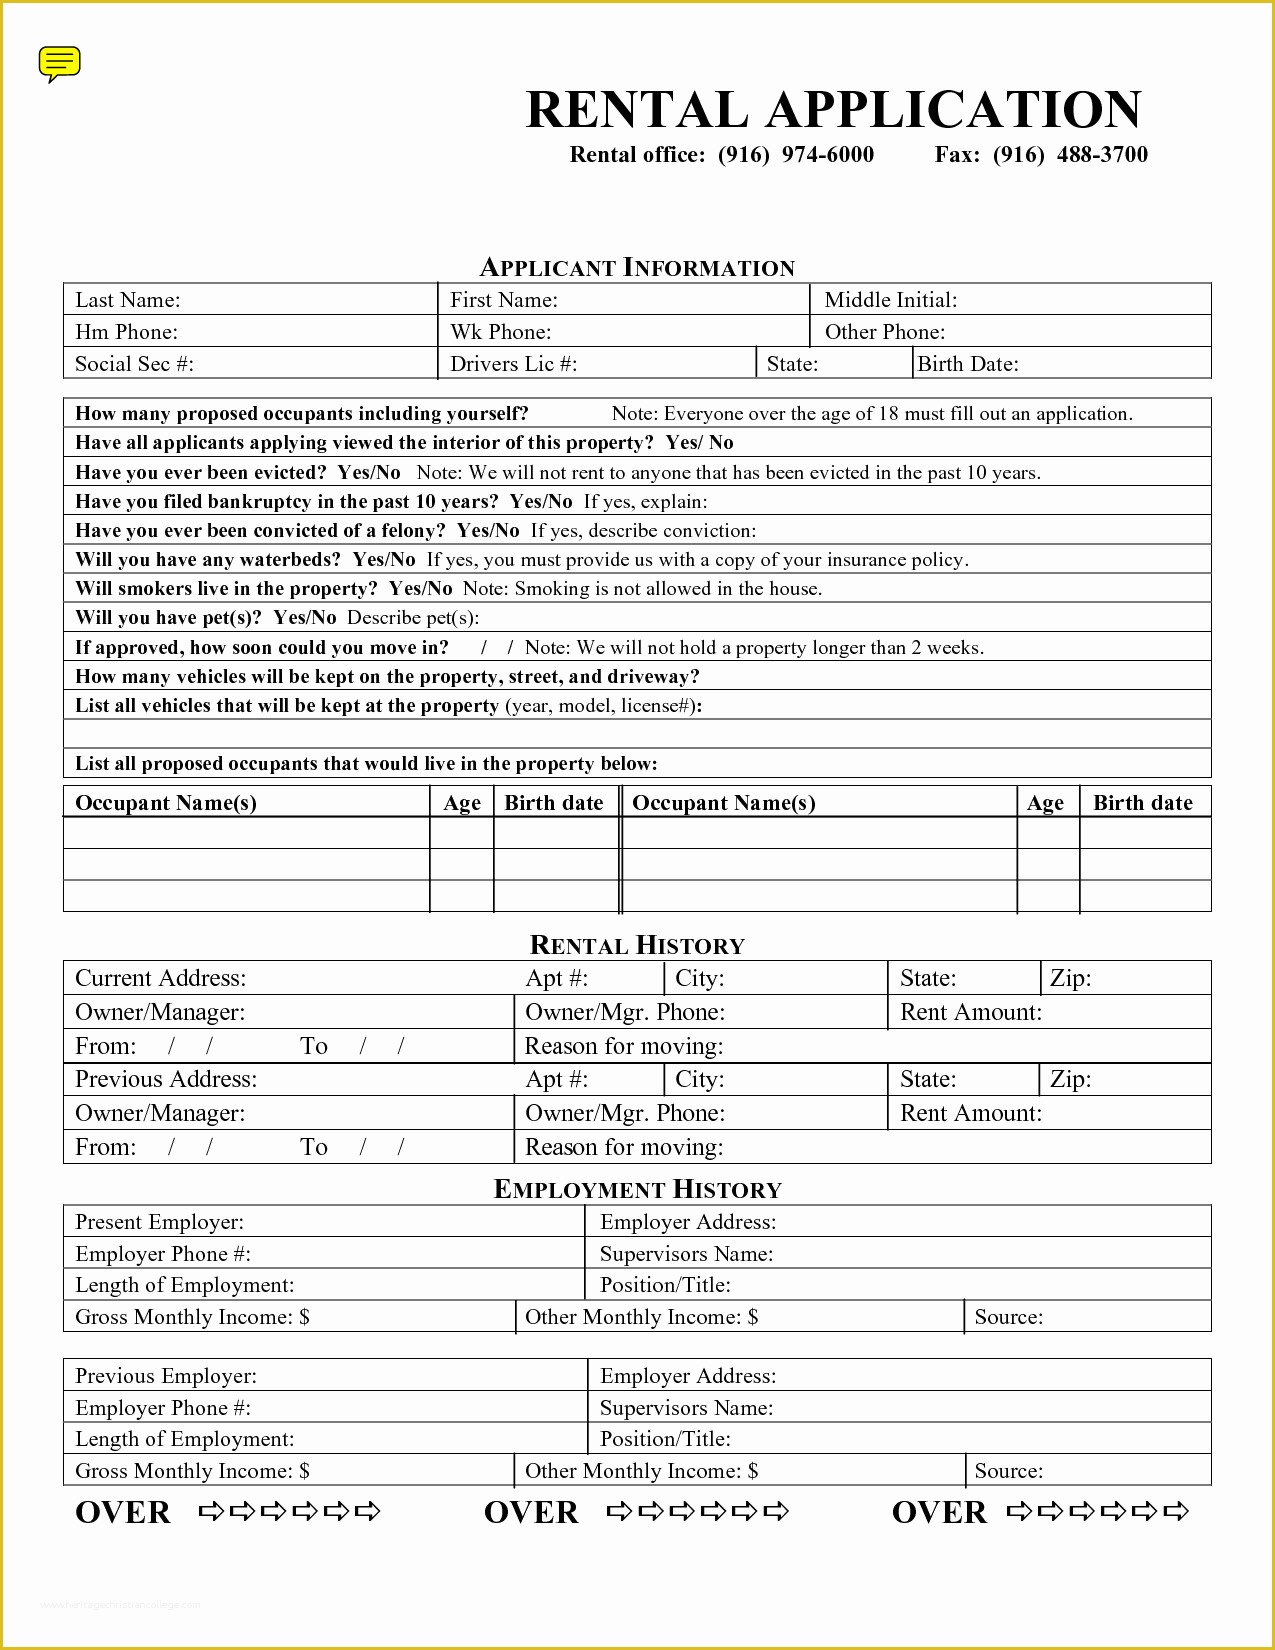 Free Employment Application Template Florida Of Free Rental Application form by Mary Jmenintigar House